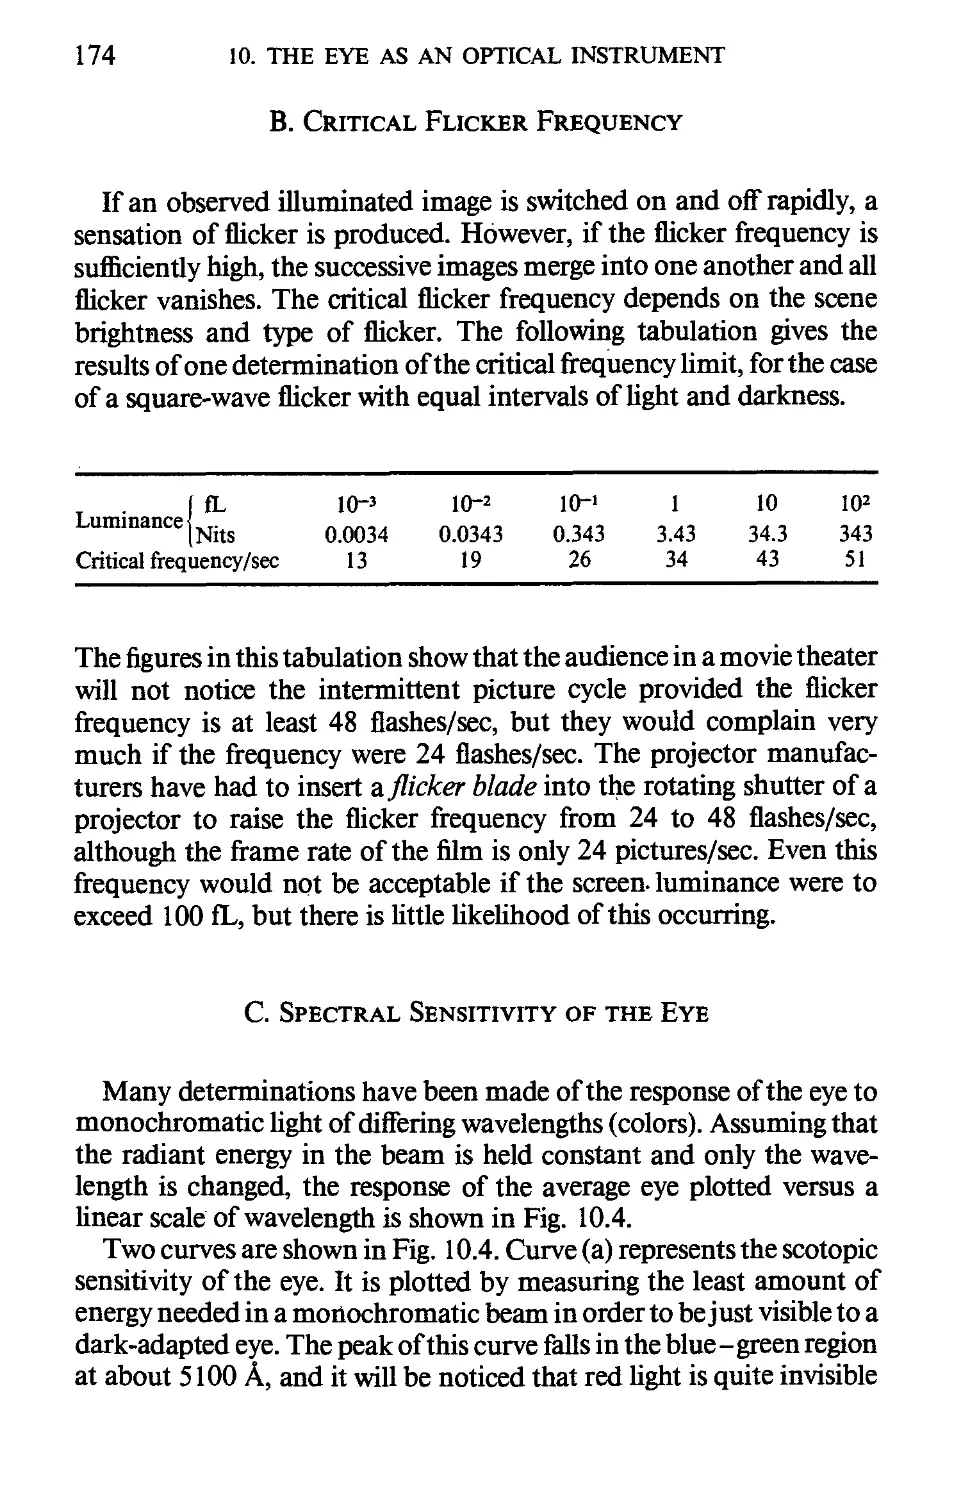 B. Critical Flicker Frequency
С. Spectral Sensitivity of the Eye